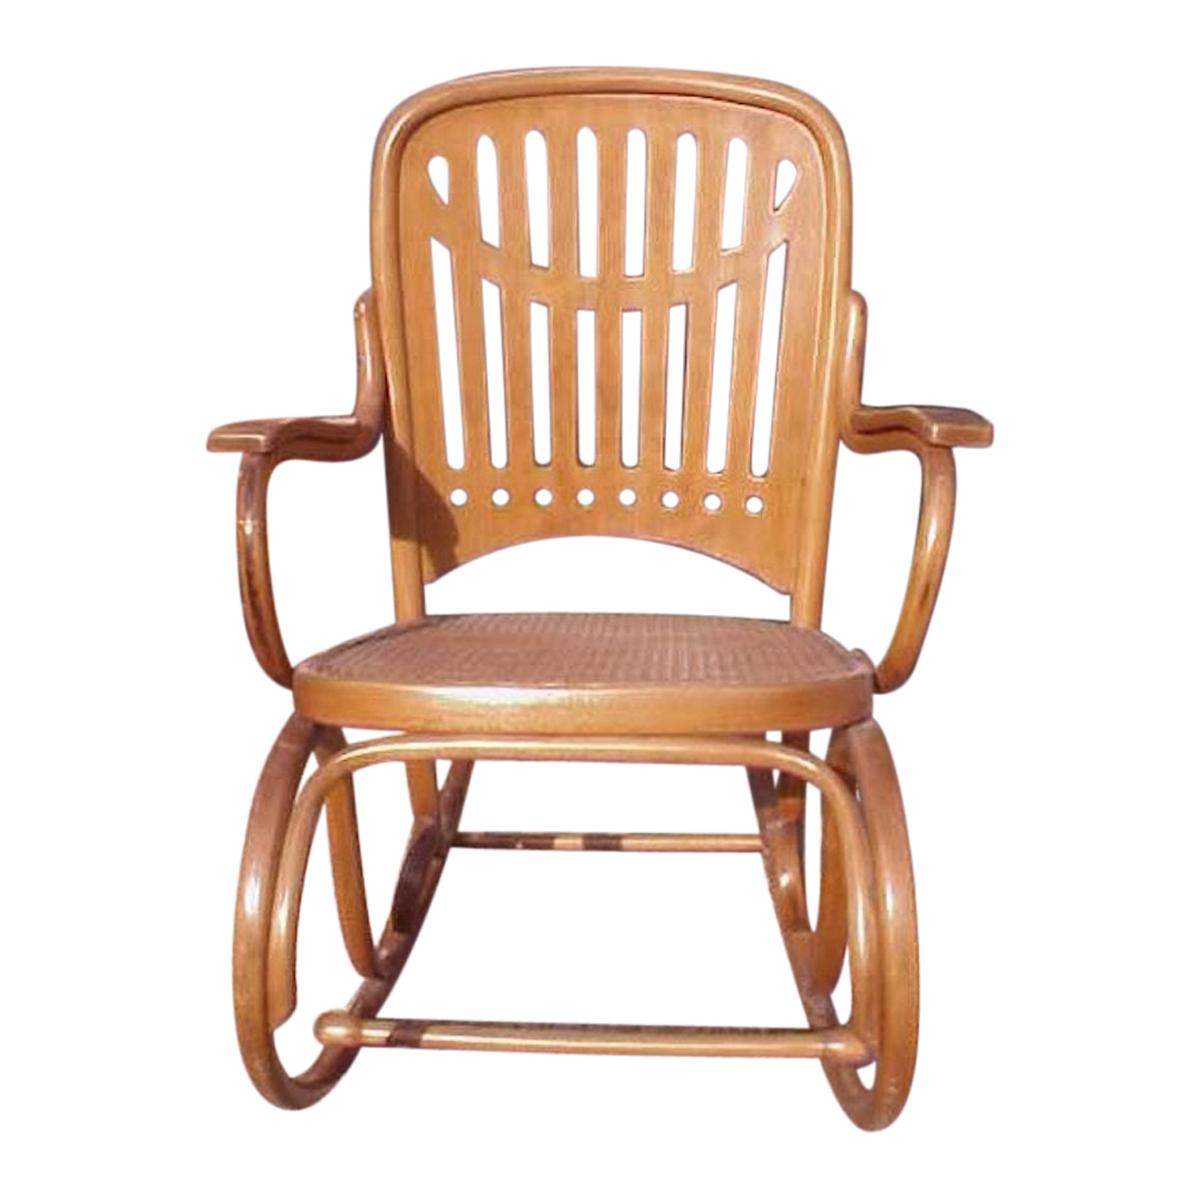 Gustav Siegel Attributed, Made by Thonet, a Bentwood & Cane Rocking Chair